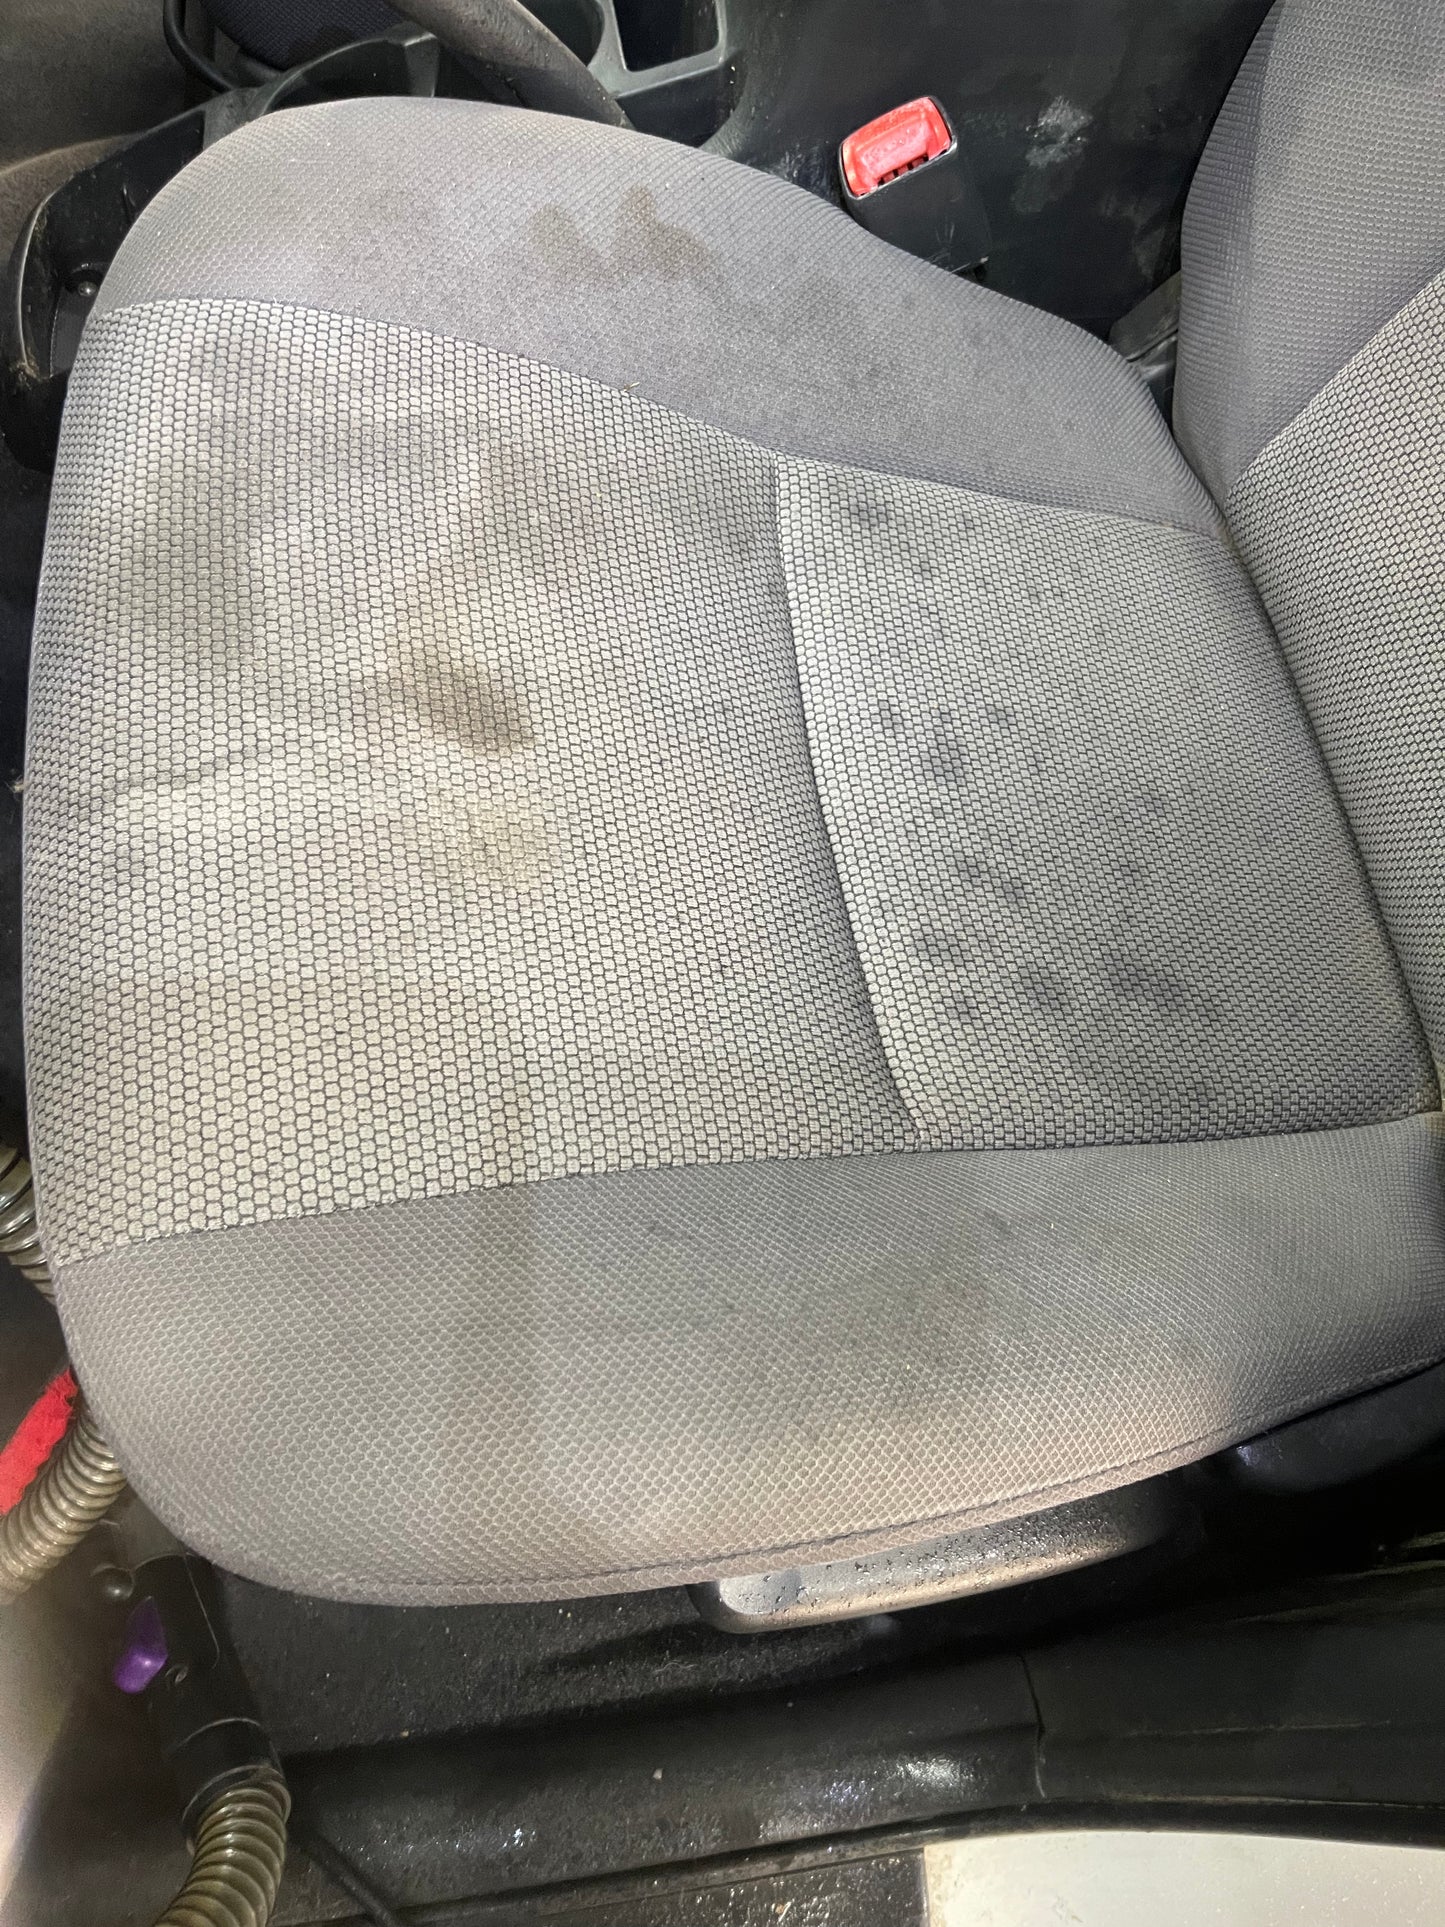 Seat & Carpet Stain Removal